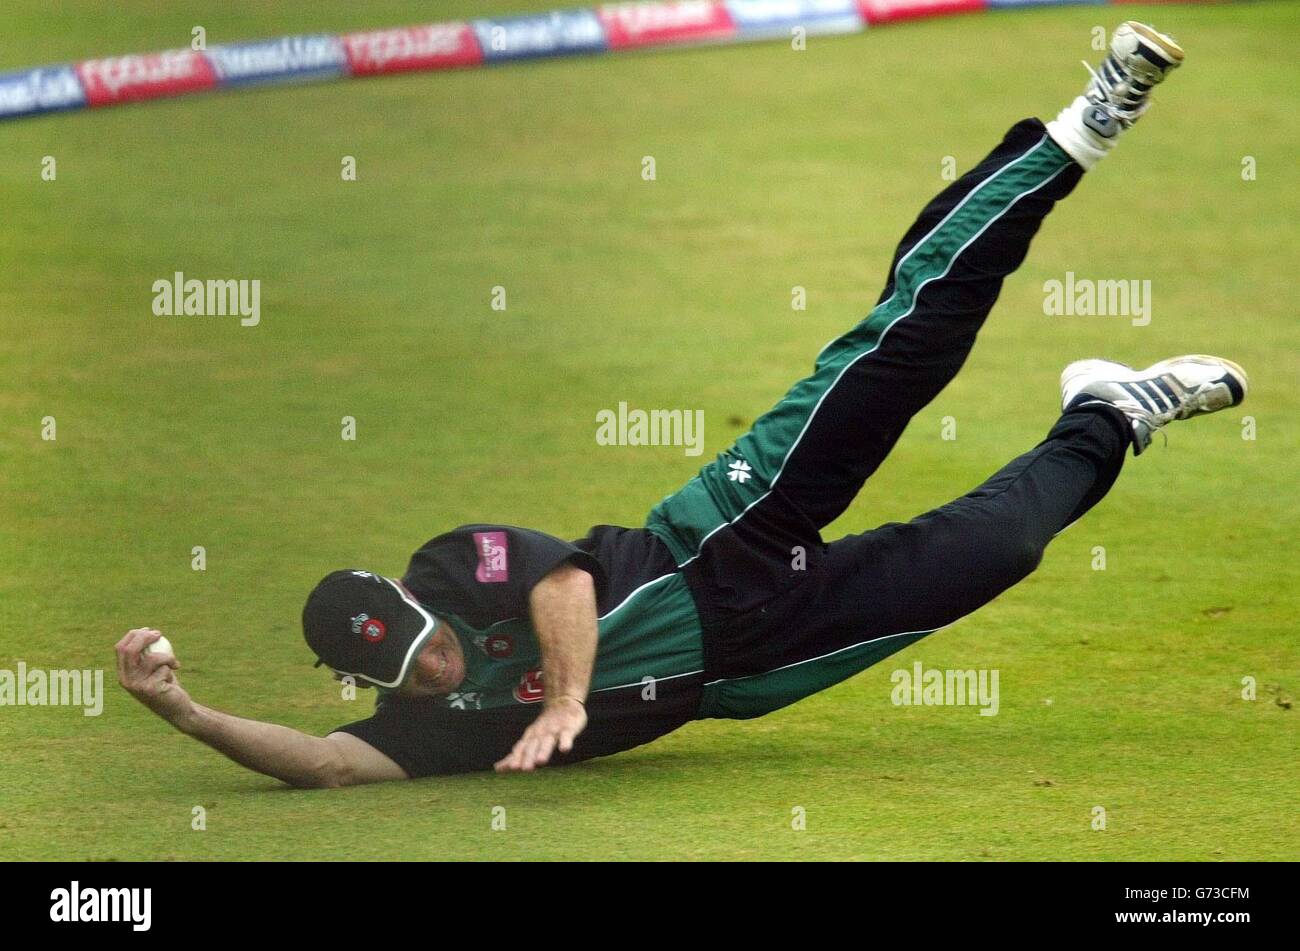 Worcestershire's Graeme Hick dives to hold on to a catch to dismiss Glamorgan's Matthew Maynard for 44 during the Twenty 20 Cup match at New Road, Worcester. Stock Photo